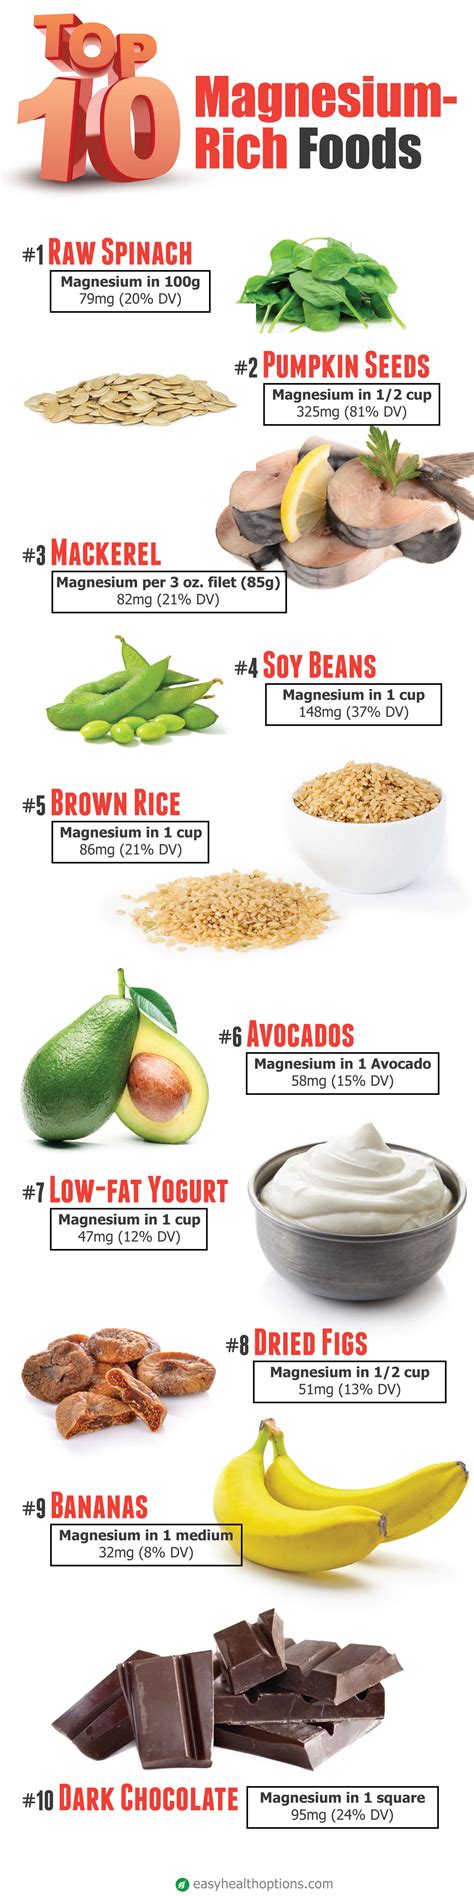 top 10 magnesium rich foods [infographic] easy health options®